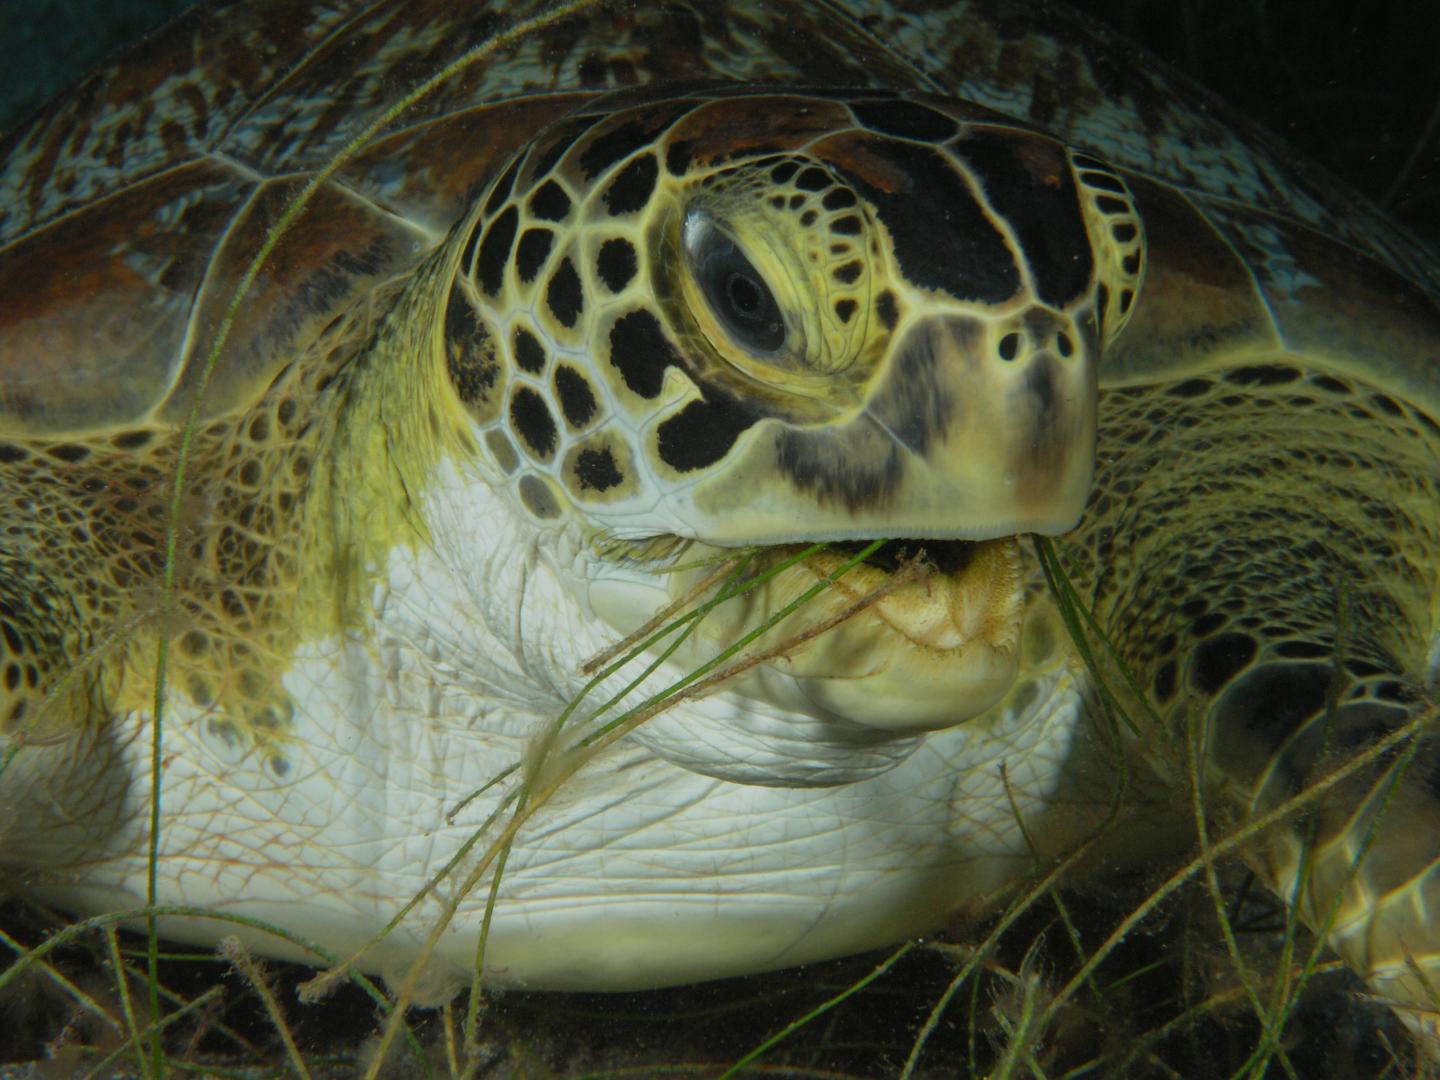 Green Turtle Eating Seagrass